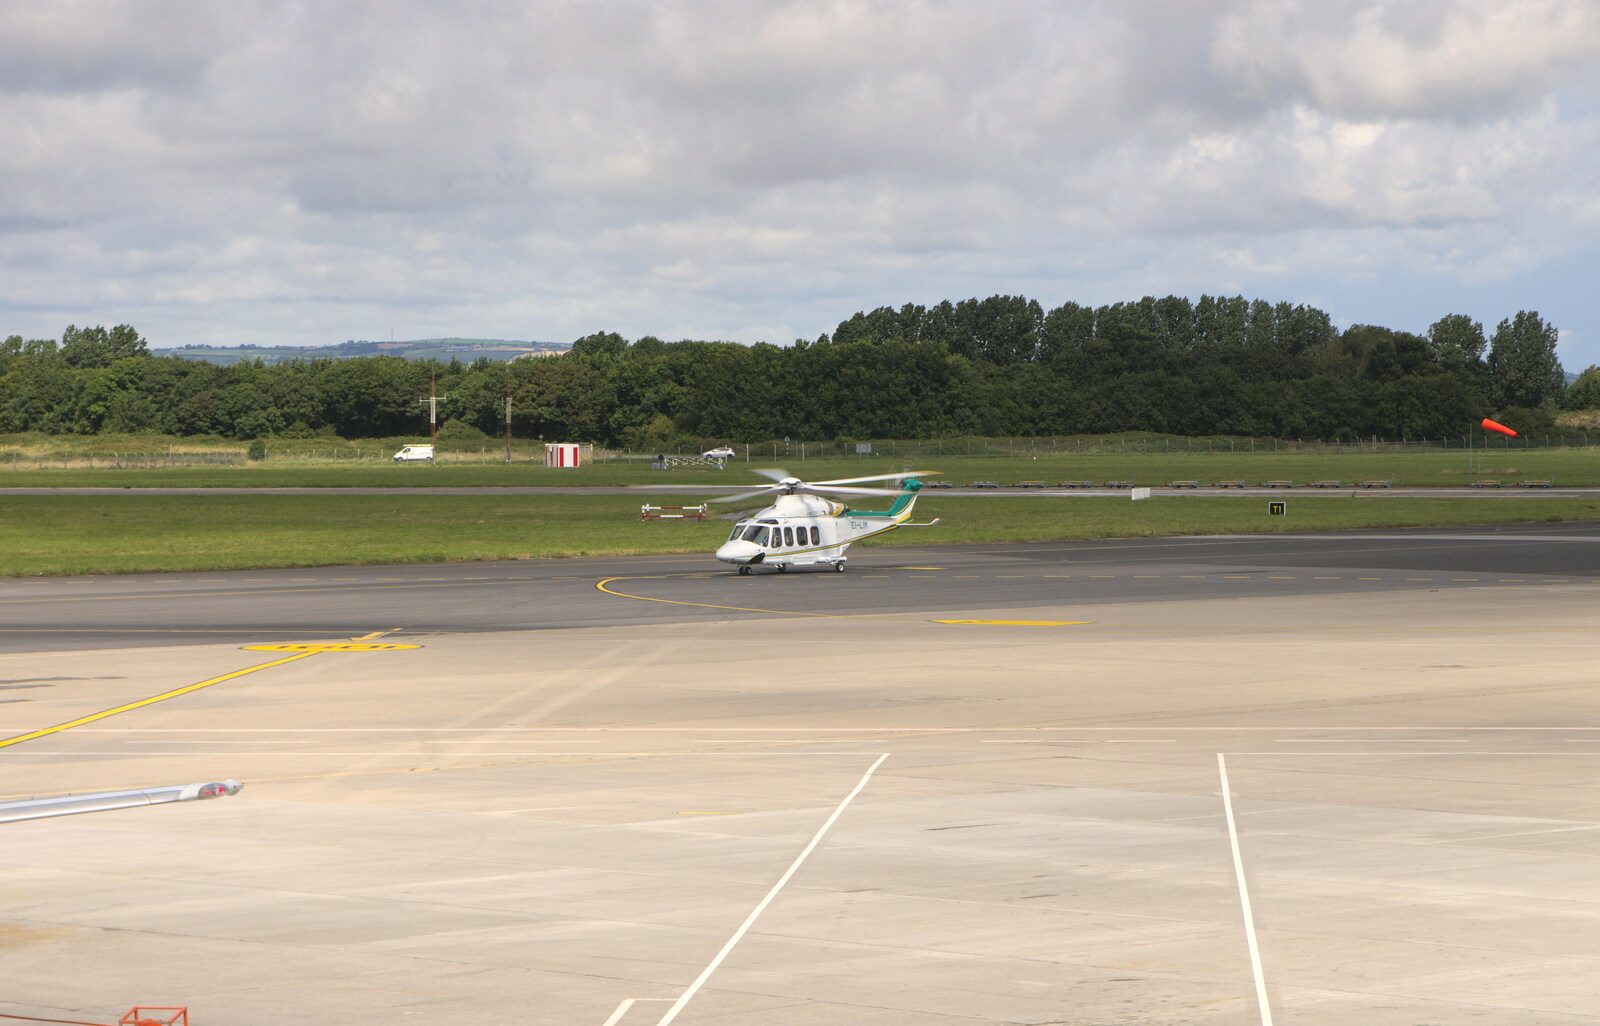 A helicopter comes in to land from A Night Out in Dublin, County Dublin, Ireland - 9th August 2014